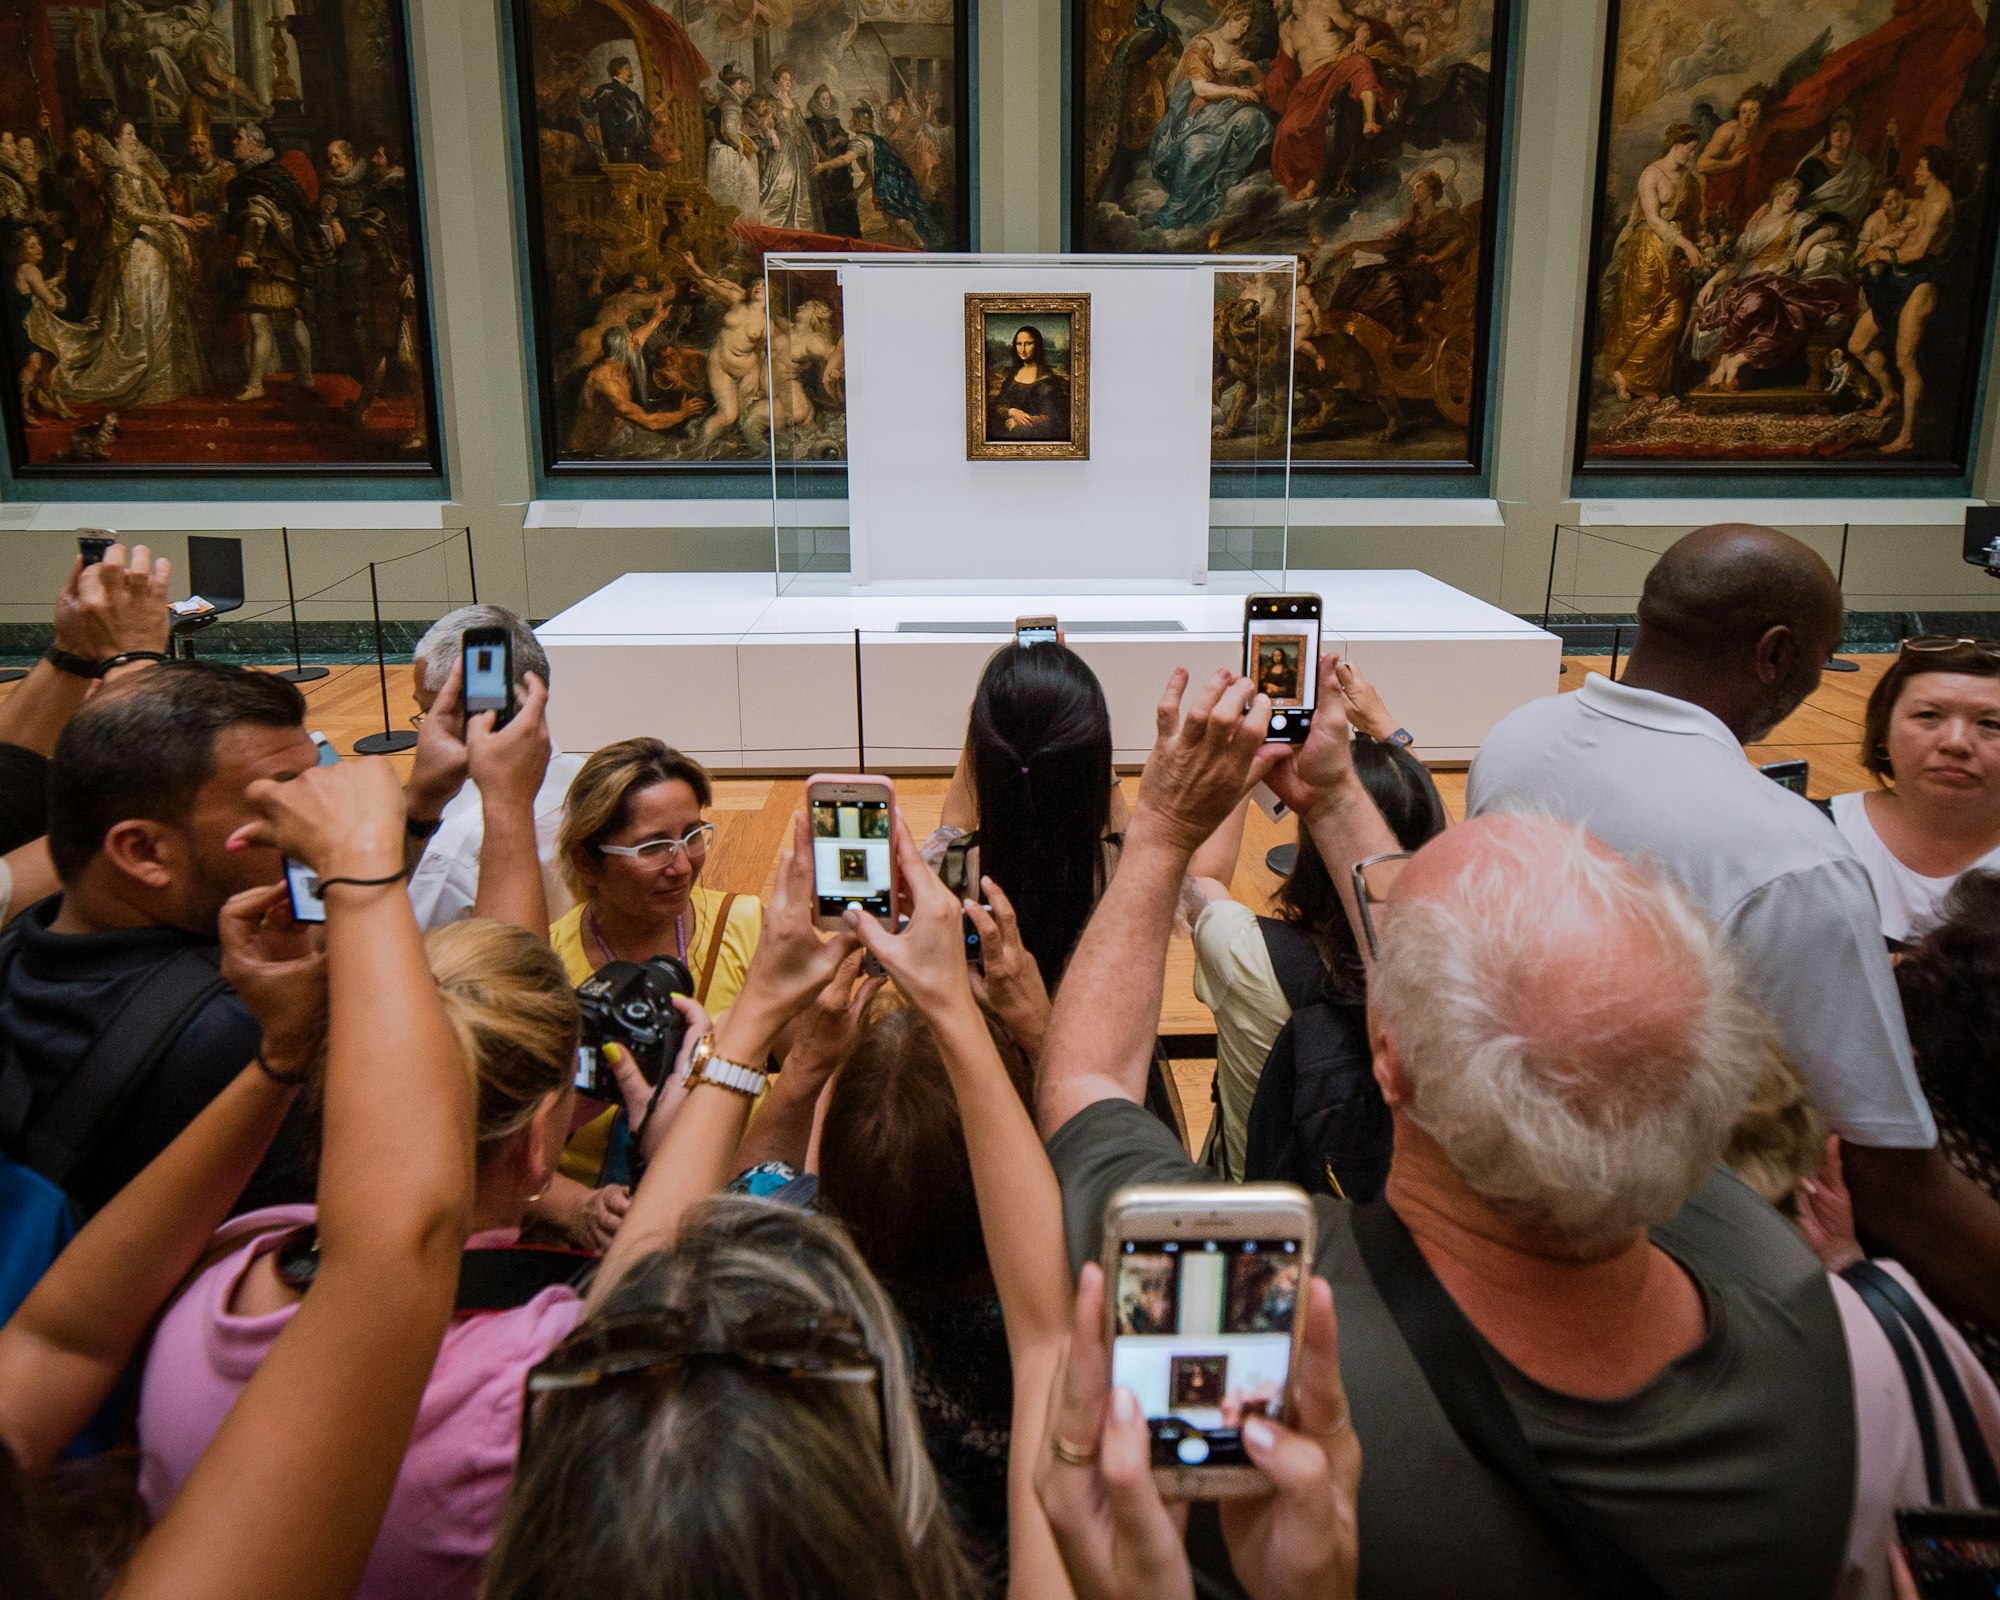 Mona Lisa being besieged by hundreds of Tourists just waiting for 60 seconds of time in front of this picture. Paris Picdump #3 Louvre